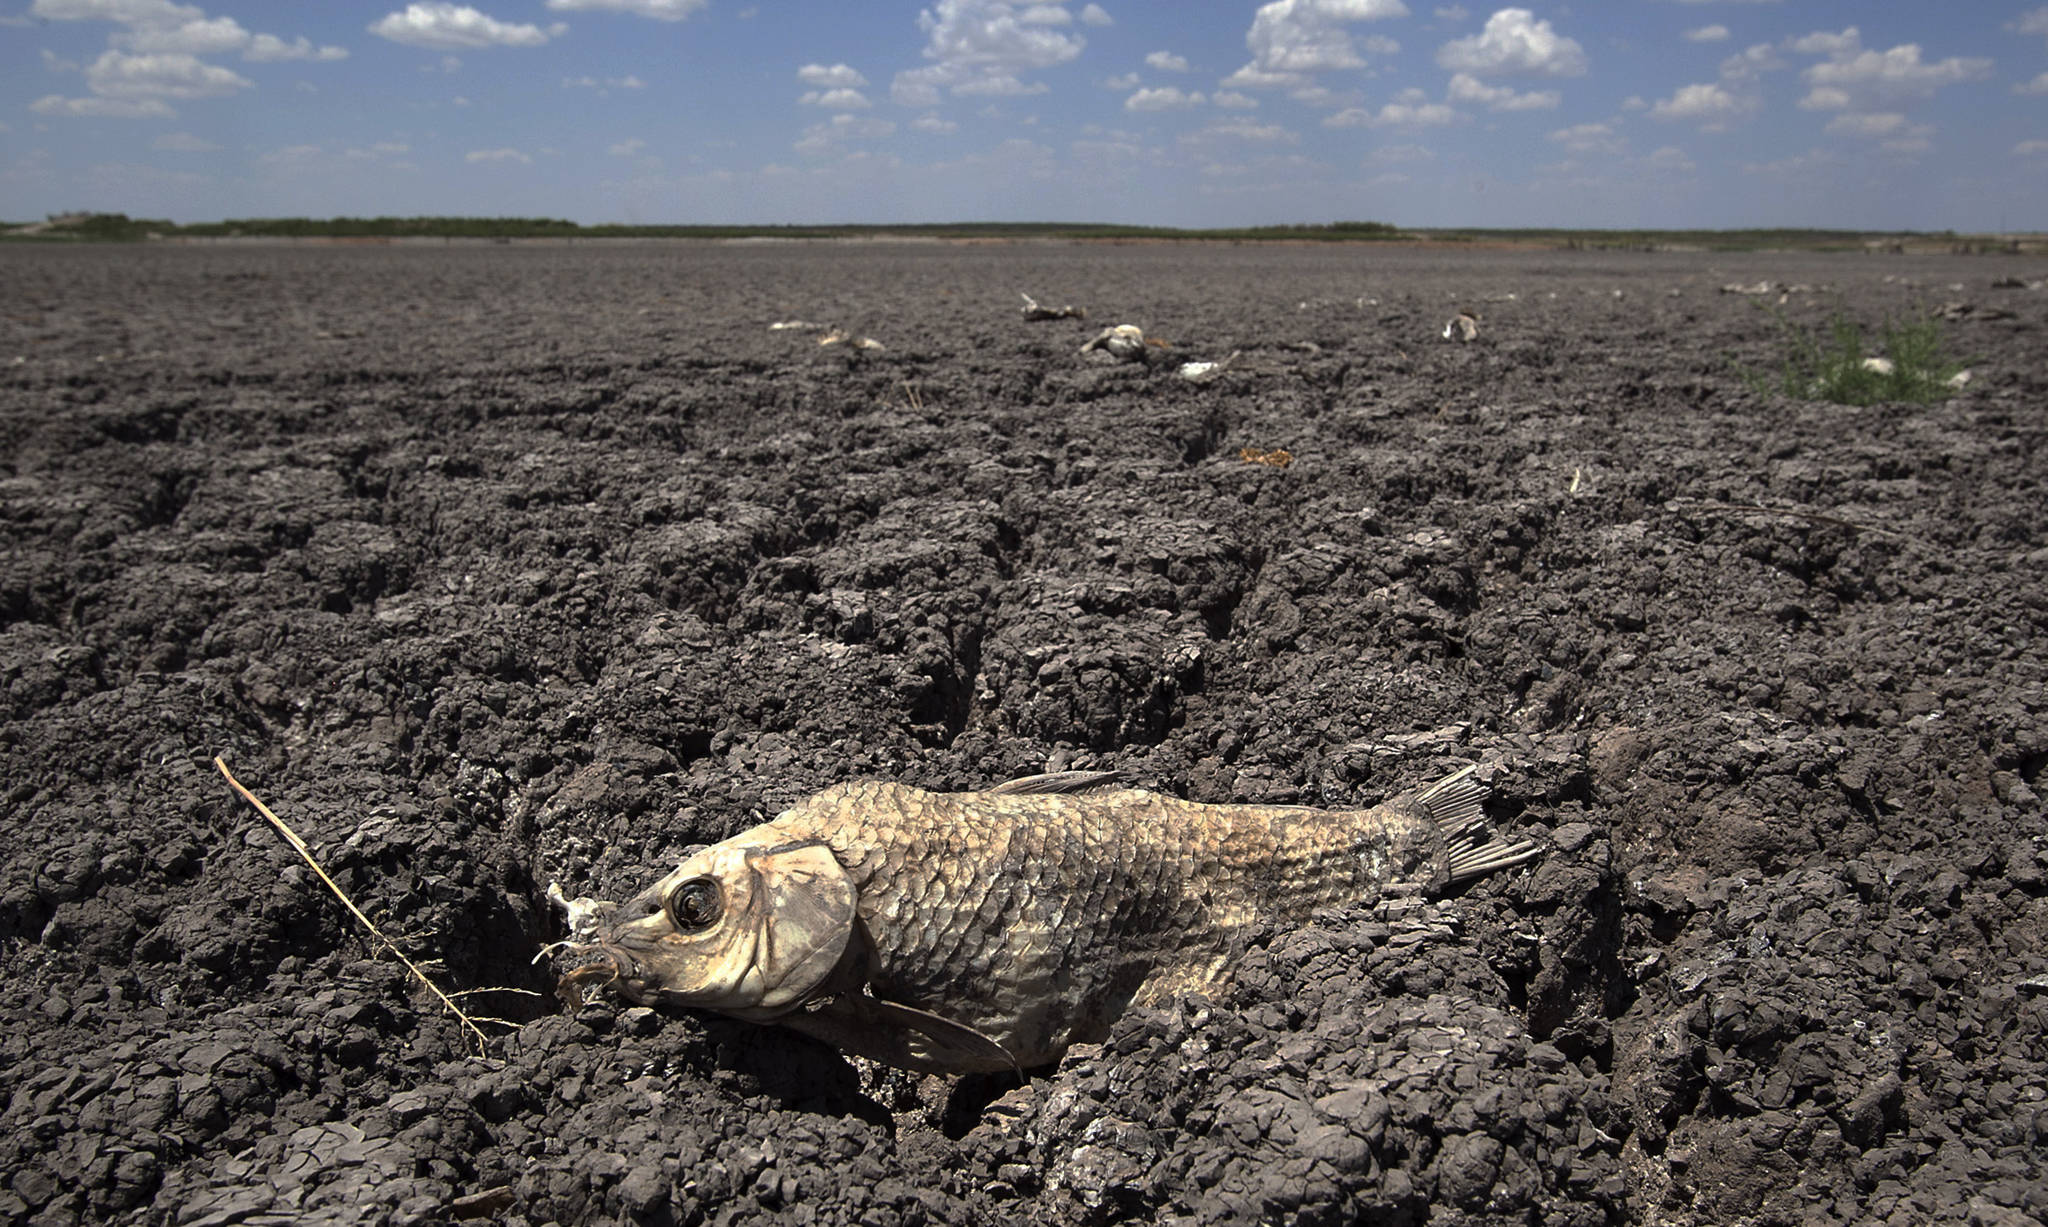 FILE - In this Wednesday, Aug. 3, 2011 file photo, the remains of a carp are seen on the dry lake bed of O.C. Fisher Lake in San Angelo, Texas. According to data released by the National Oceanic and Atmospheric Administration on Tuesday, May 4, 2021, the new United States normal is not just hotter, but wetter in the eastern and central parts of the nation and considerably drier in the West than just a decade earlier. (AP Photo / Tony Gutierrez)